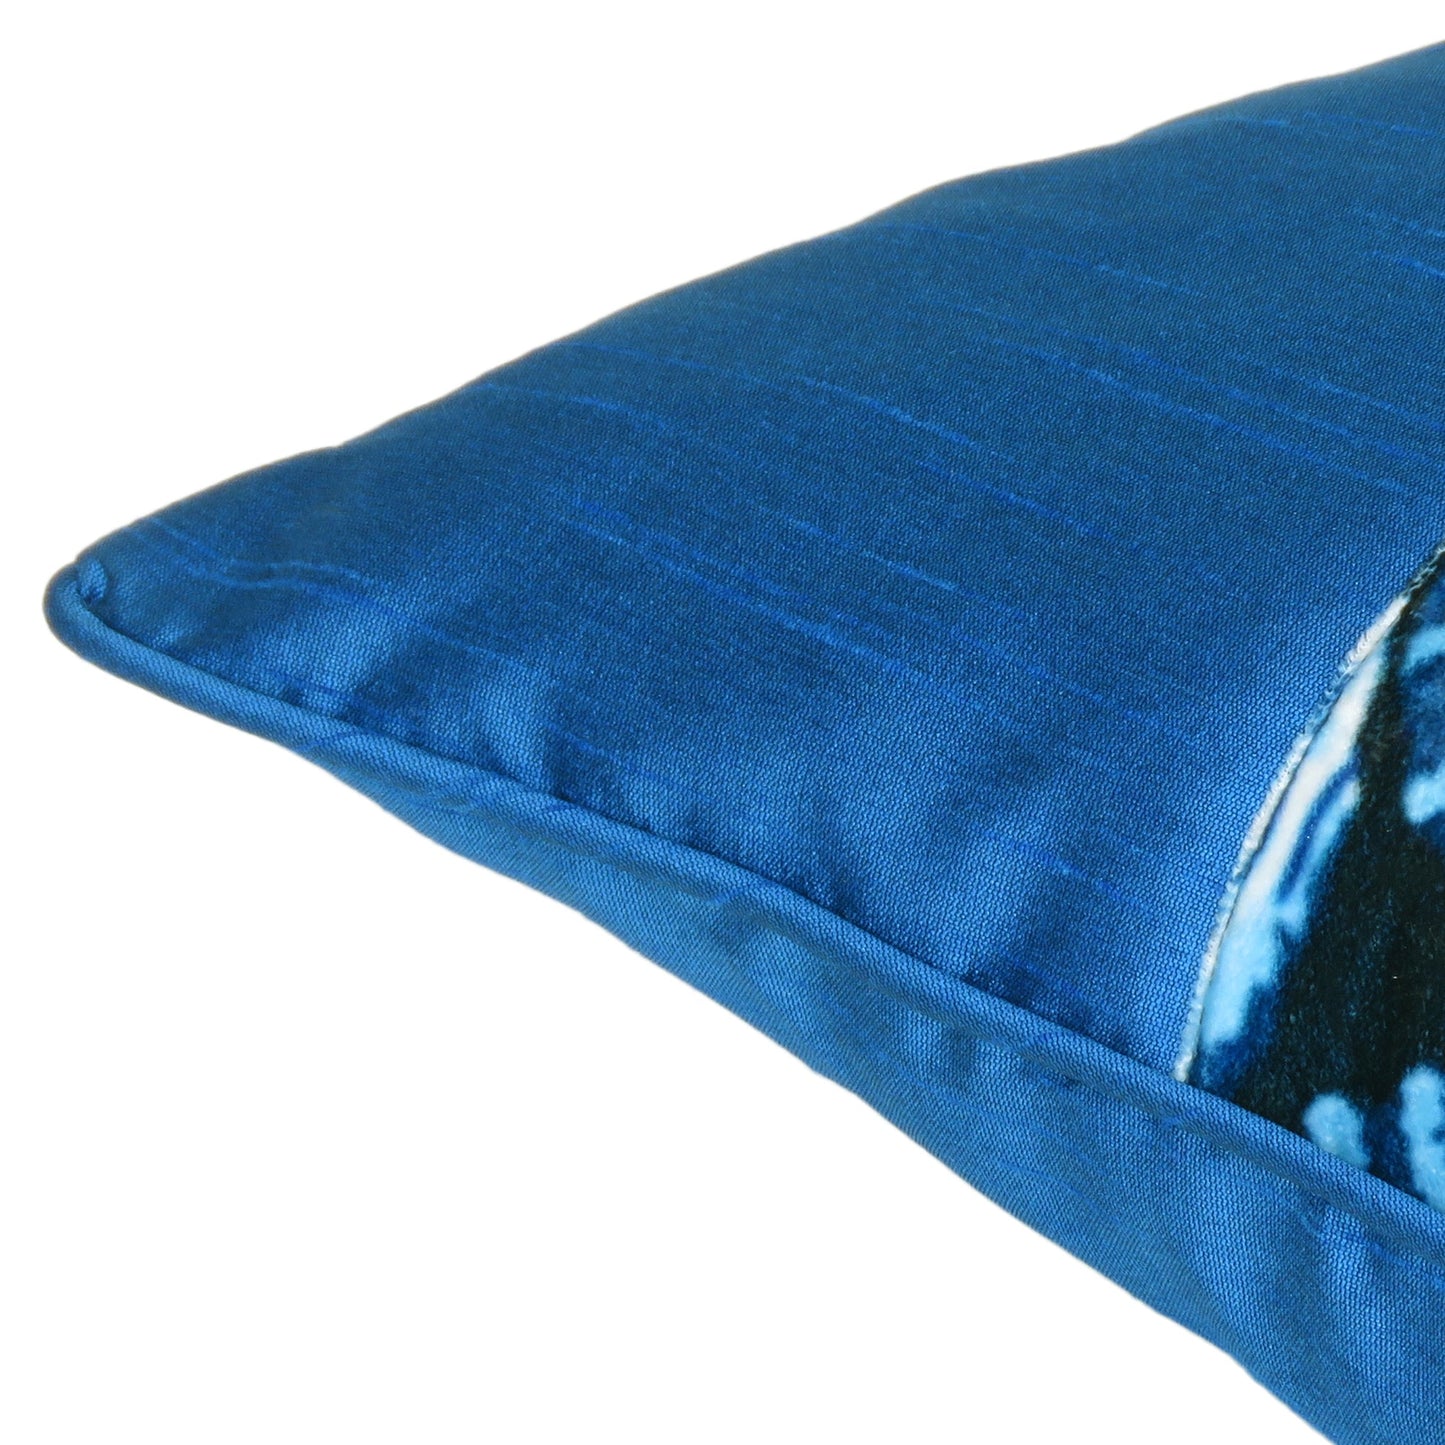 Velvet Polydupion Decorative Printed Cushion Cases in Set of 2 - Blue